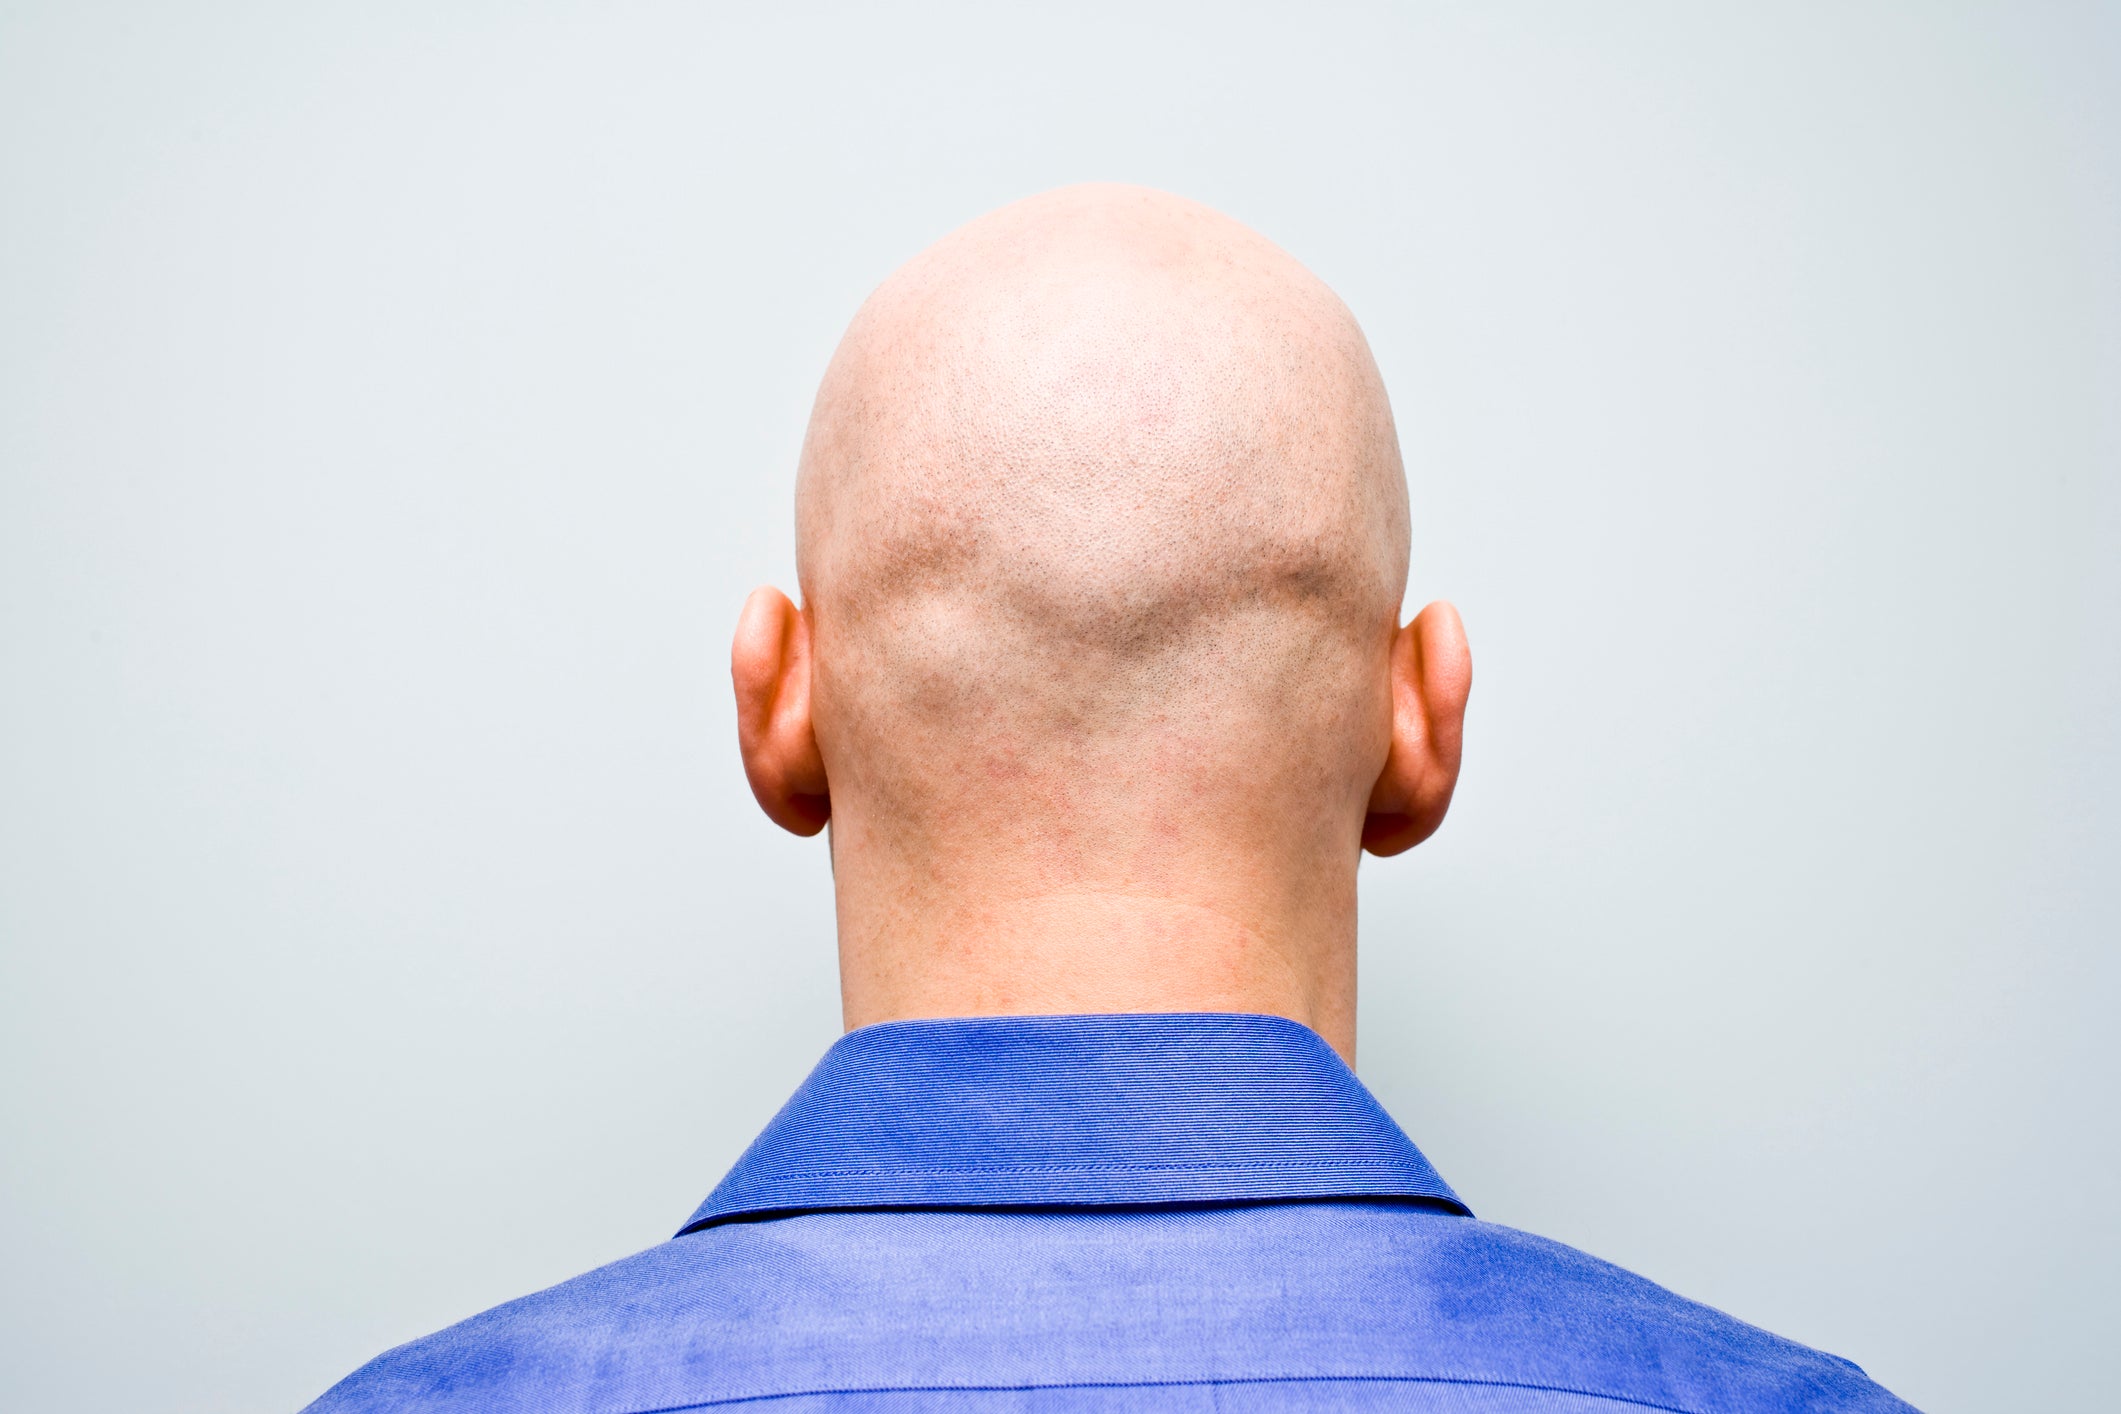 Calling man 'bald' is sex-related harassment, employment tribunal rules |  The Independent